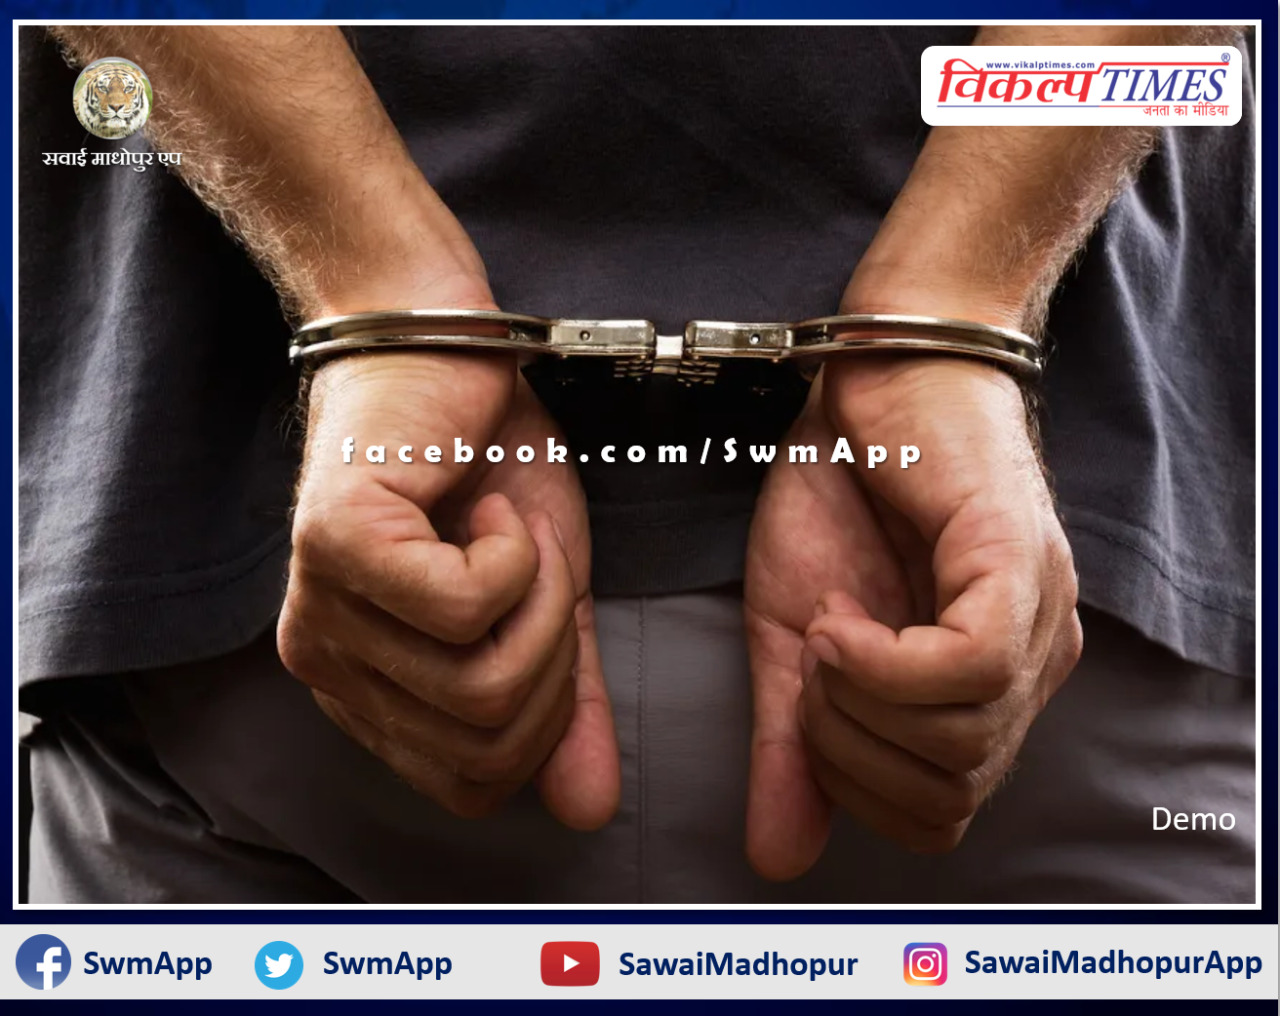 police arrested accused for causing a bind in official work in gangapur sawai madhopur